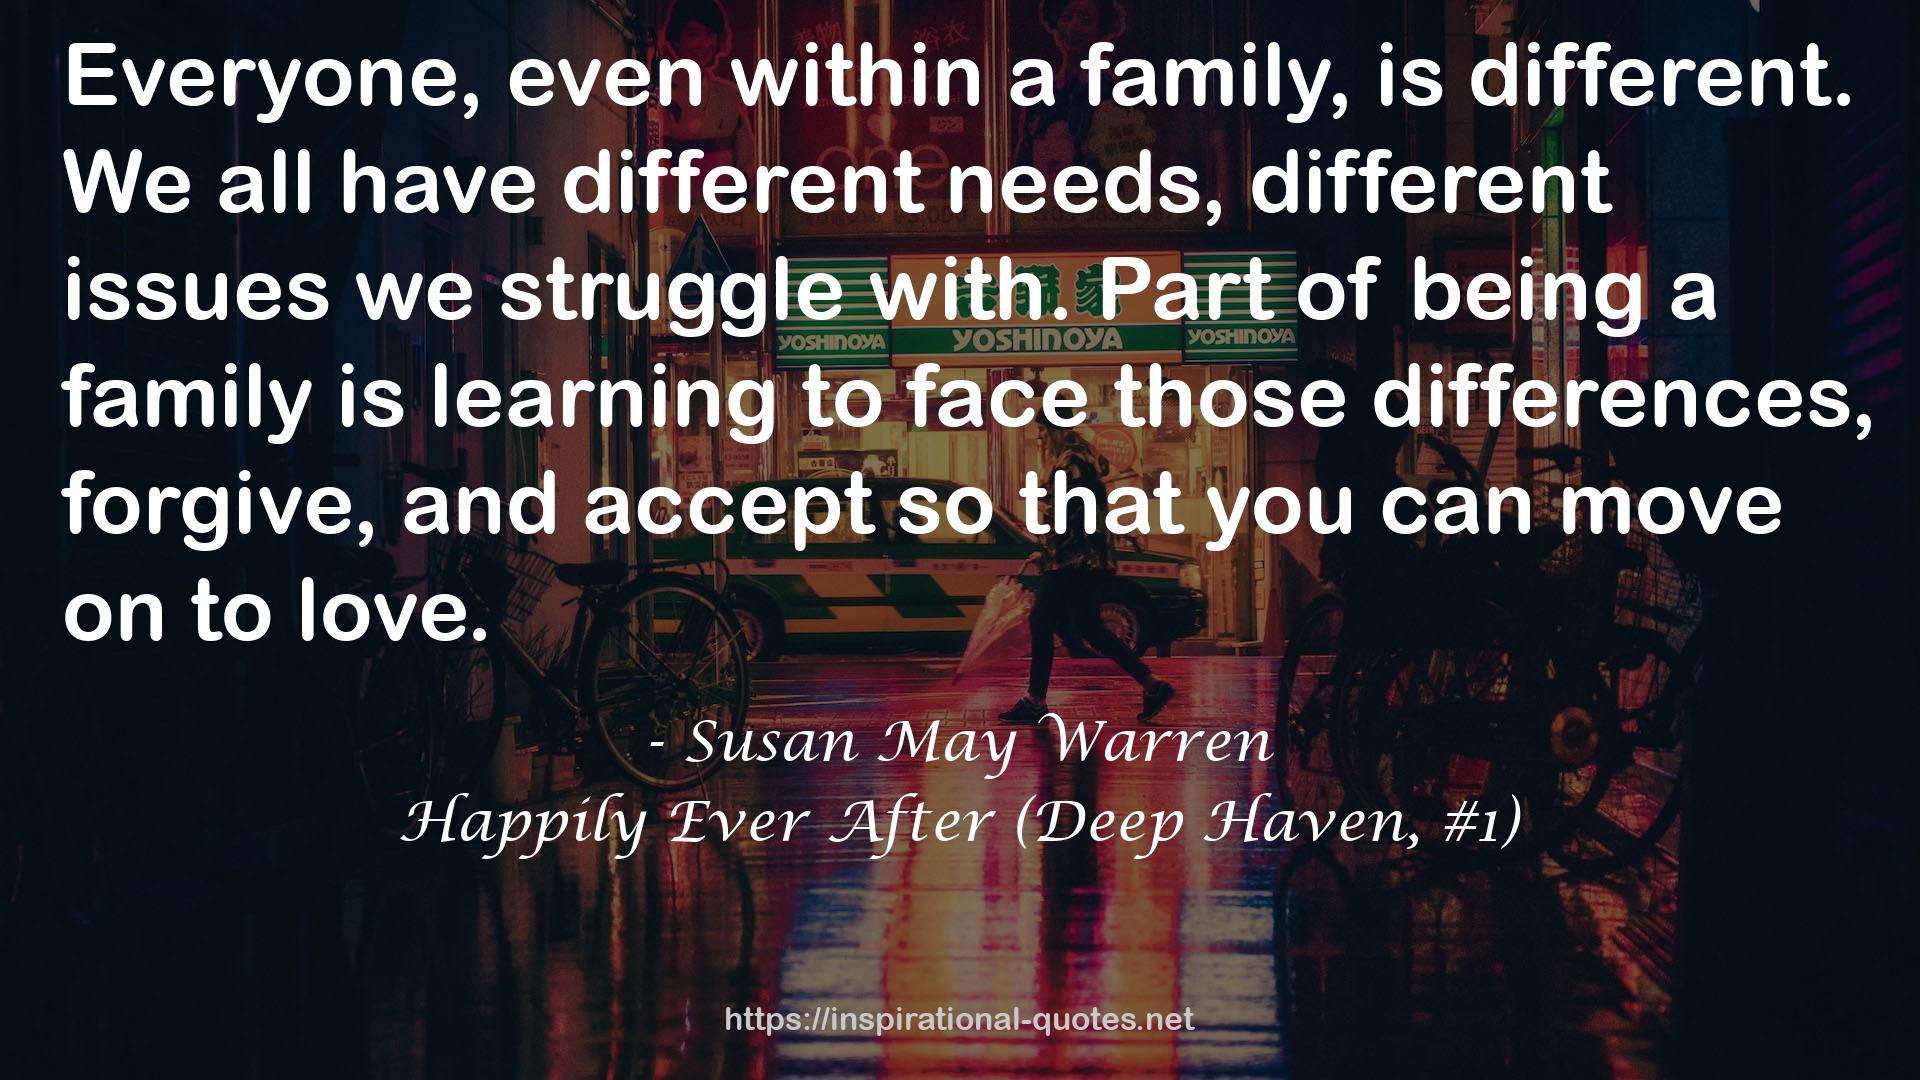 Happily Ever After (Deep Haven, #1) QUOTES